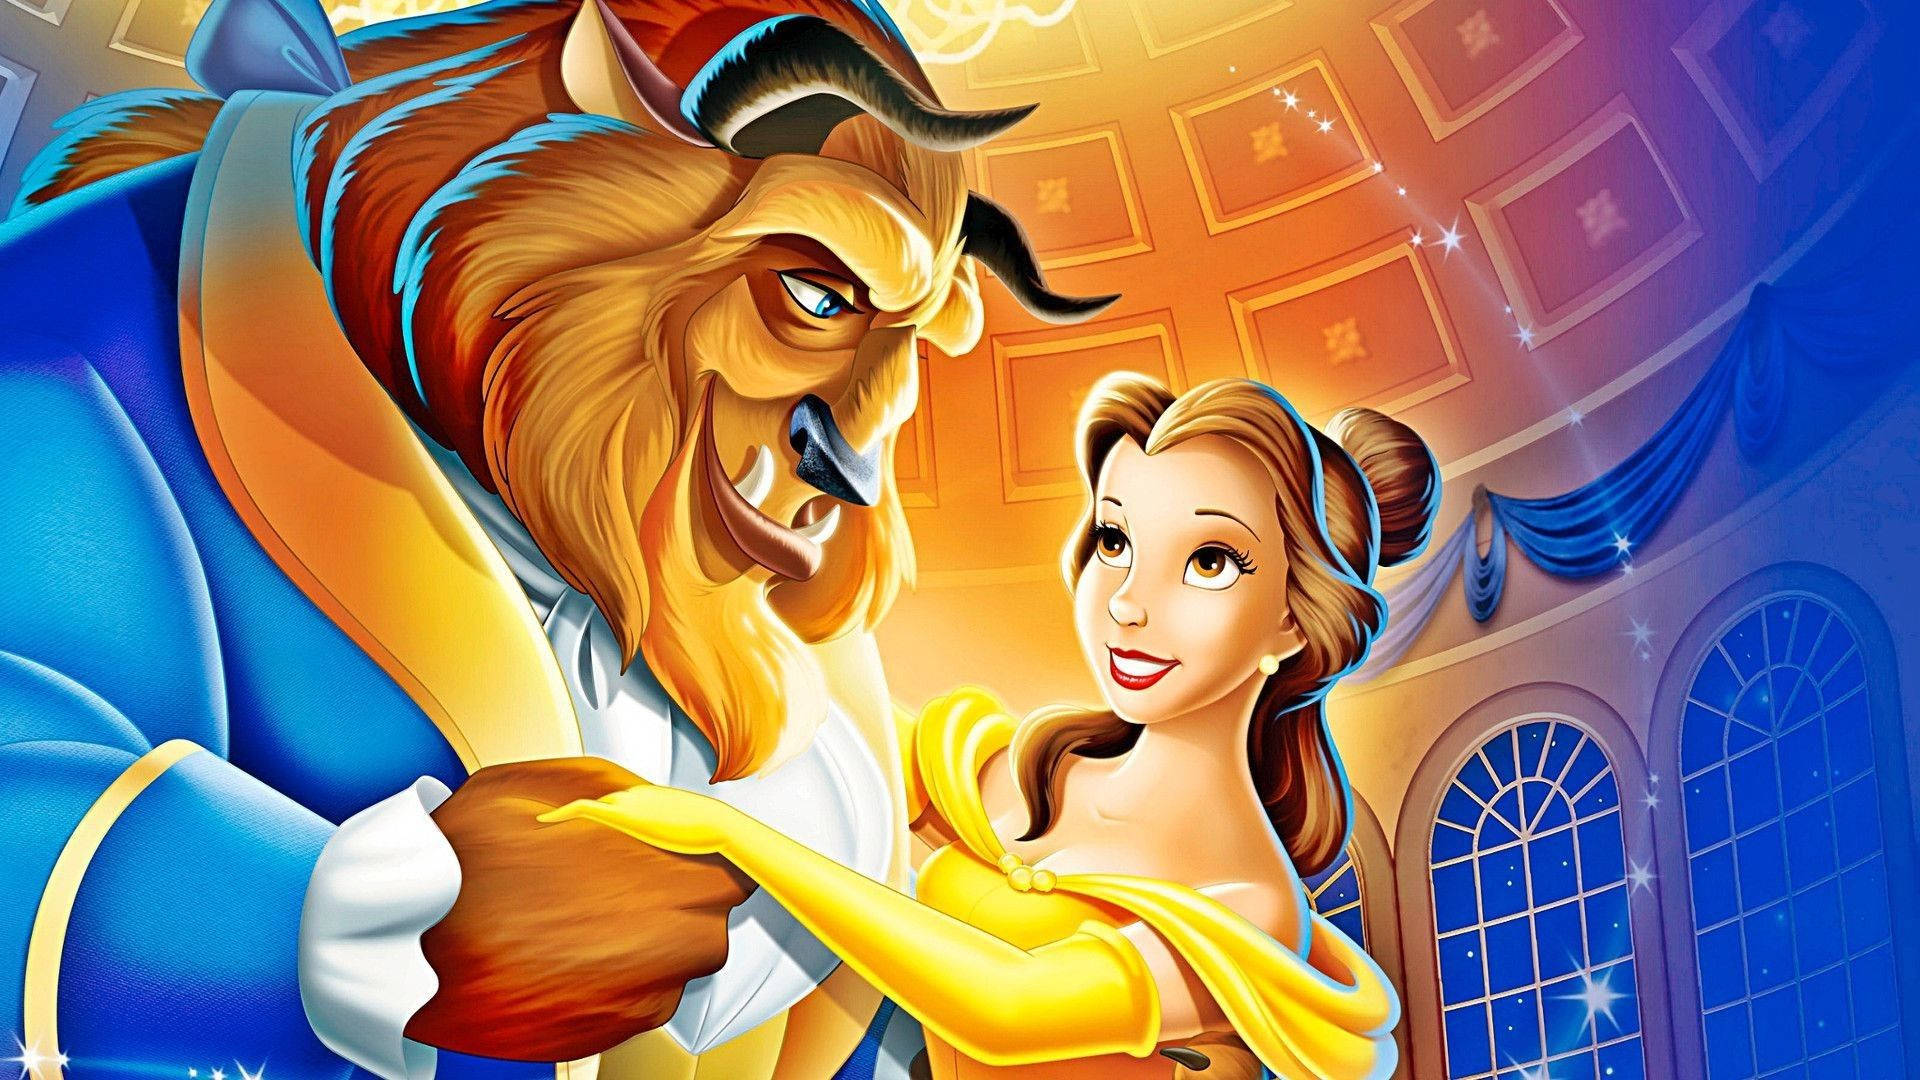 Beauty And The Beast Dance Wallpaper